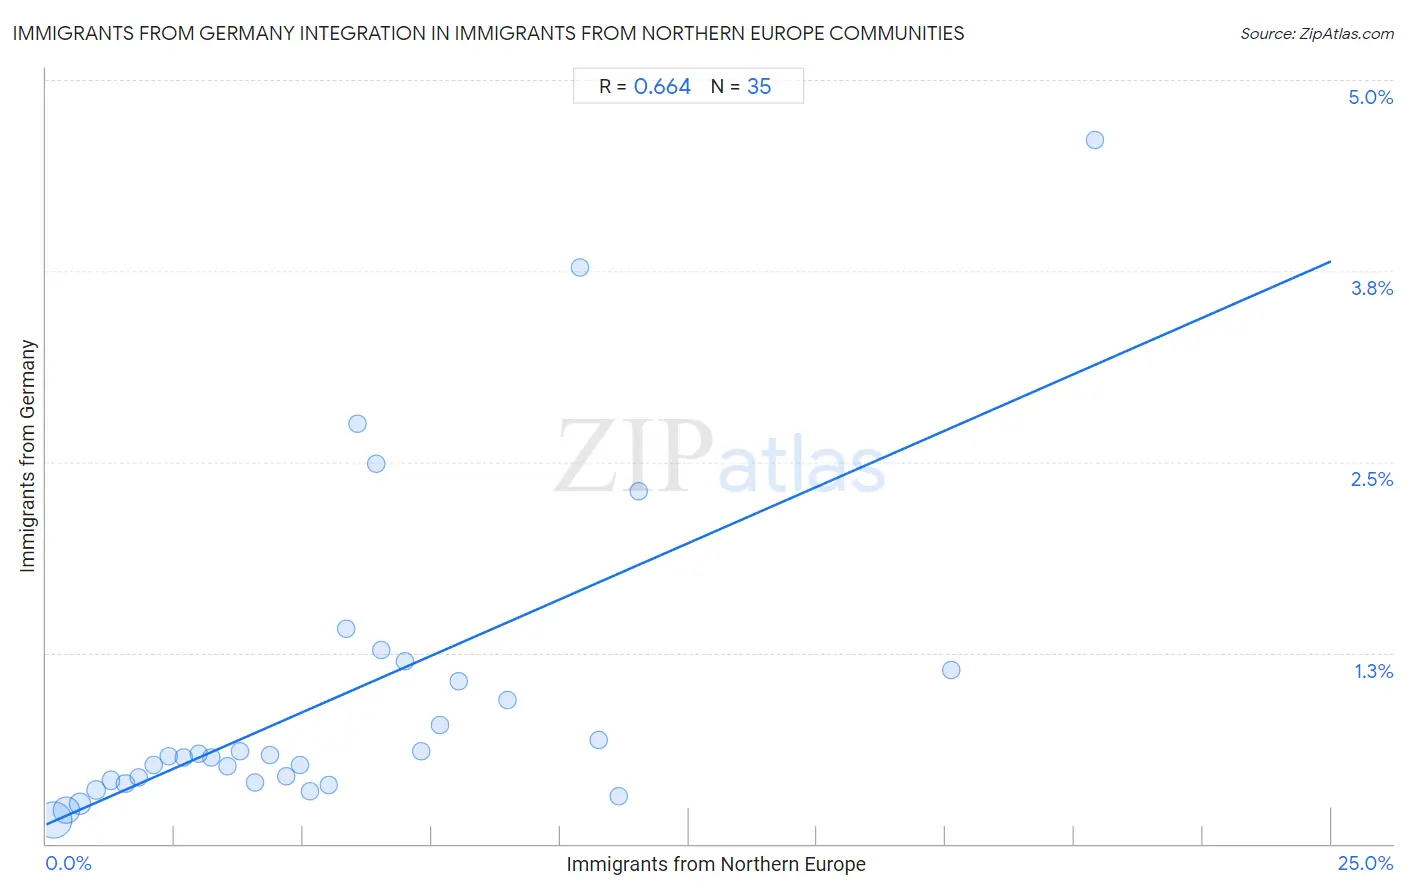 Immigrants from Northern Europe Integration in Immigrants from Germany Communities